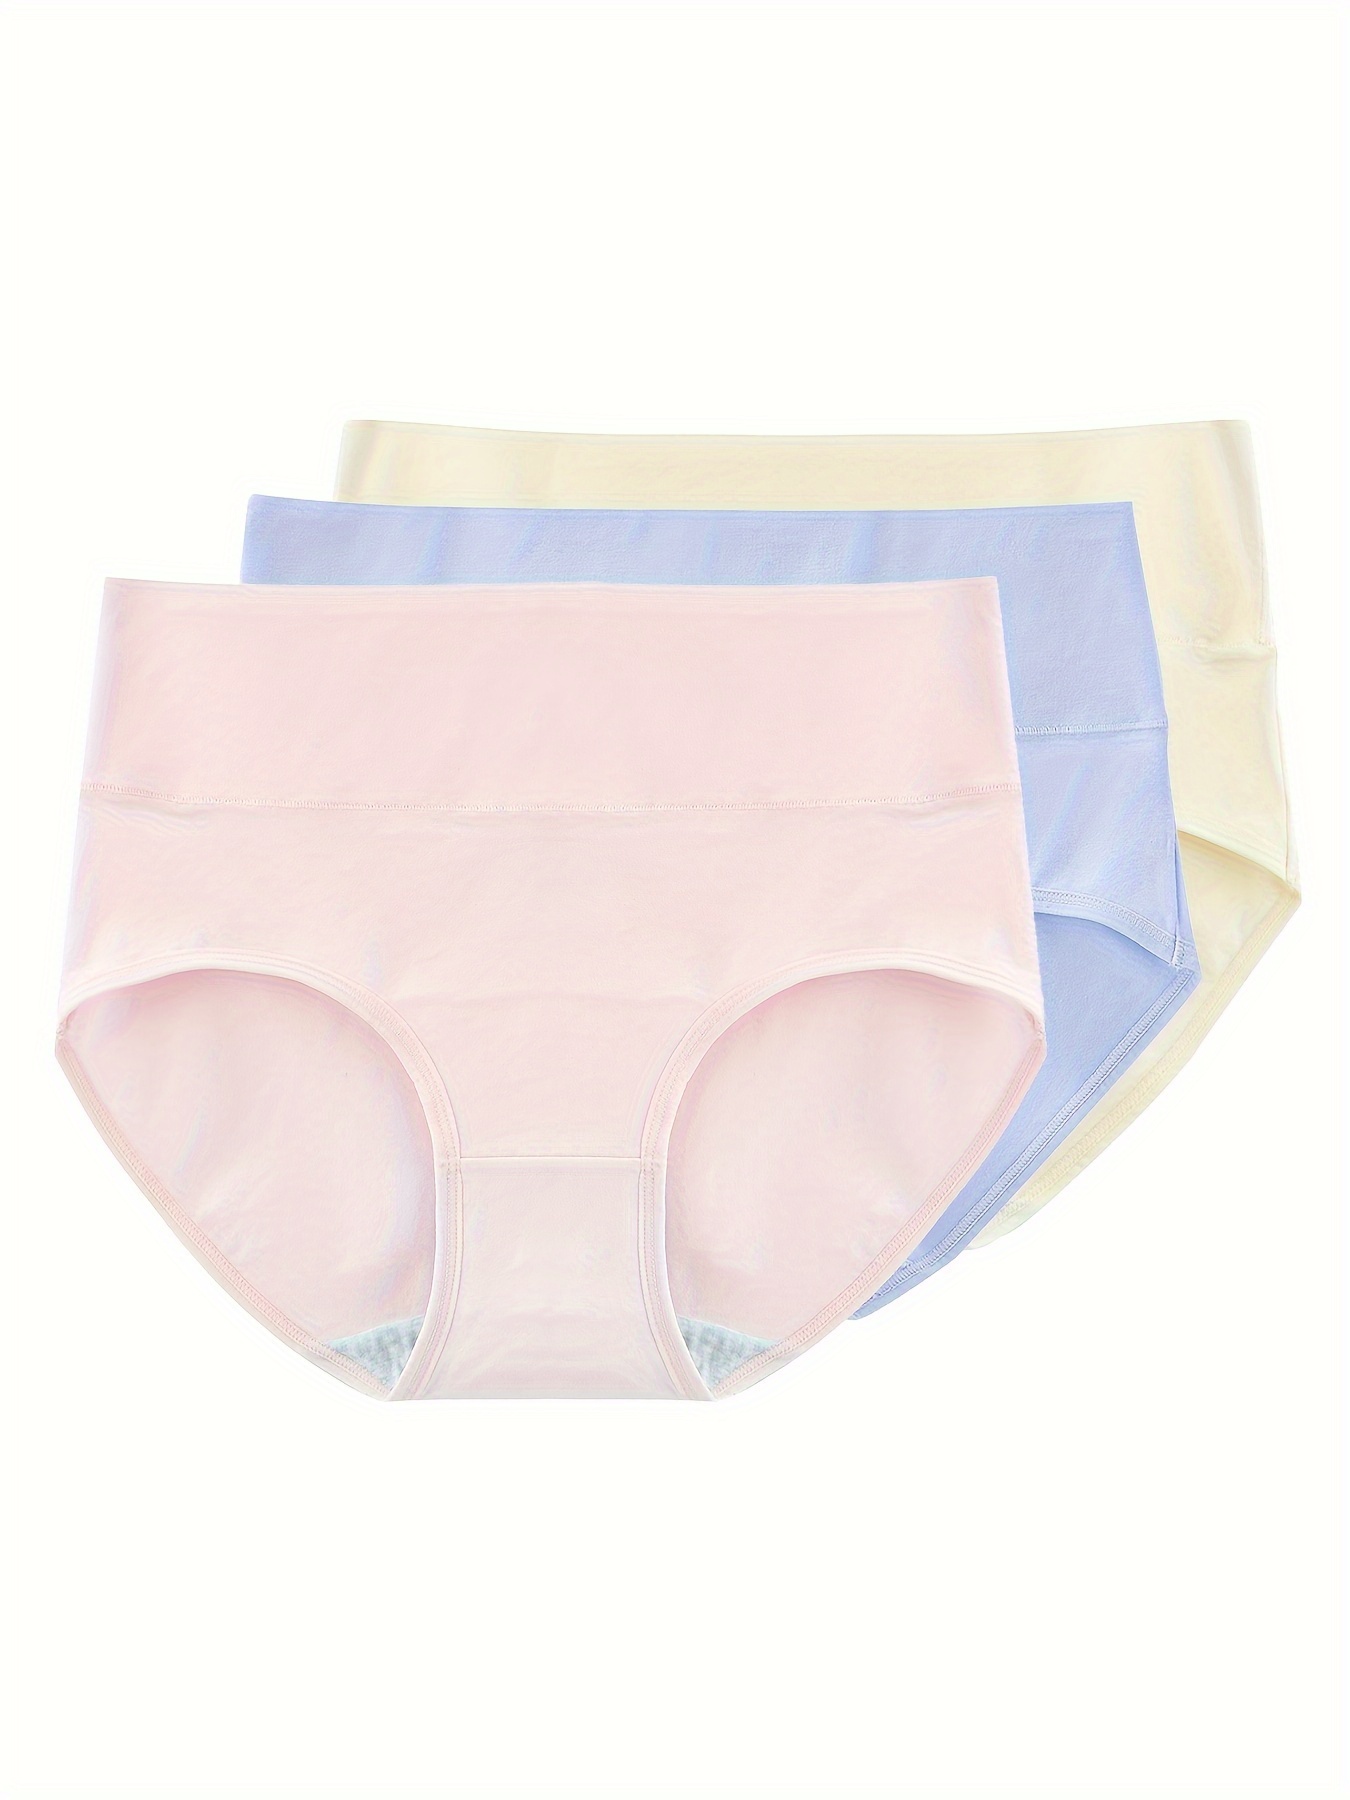 Innersy + INNERSY High Cut Tummy Control Cotton Underpants